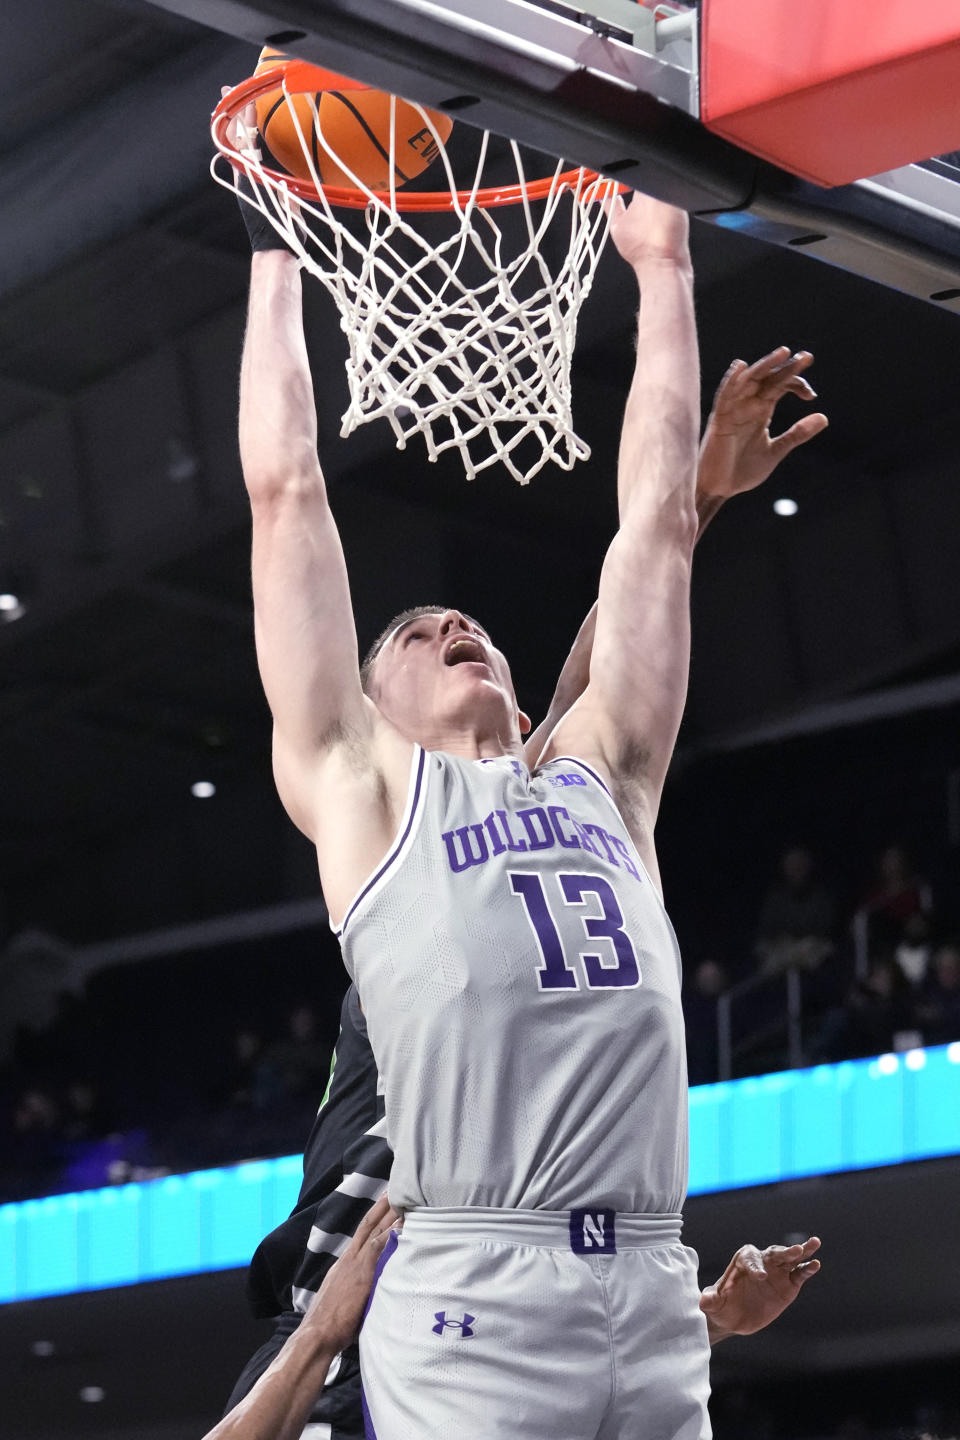 Northwestern guard Brooks Barnhizer (13) goes up for a shot past Chicago State forward Cameron Jernigan during the first half of an NCAA college basketball game in Evanston, Ill., Wednesday, Dec. 13, 2023. (AP Photo/Nam Y. Huh)